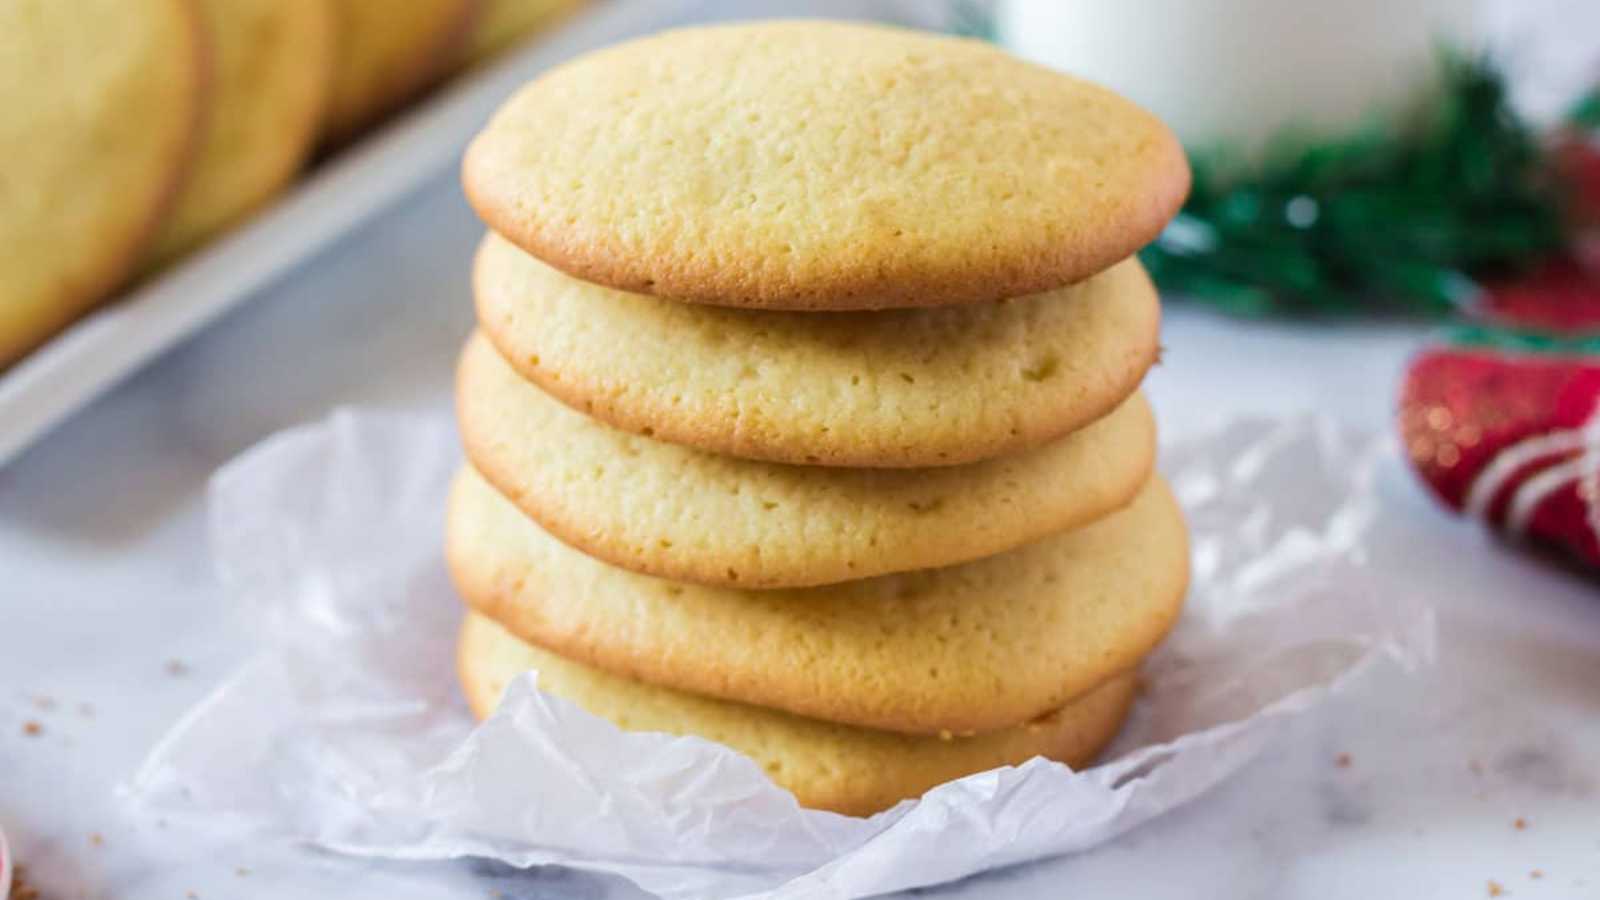 Five stacked plain sugar cookies on parchment paper.